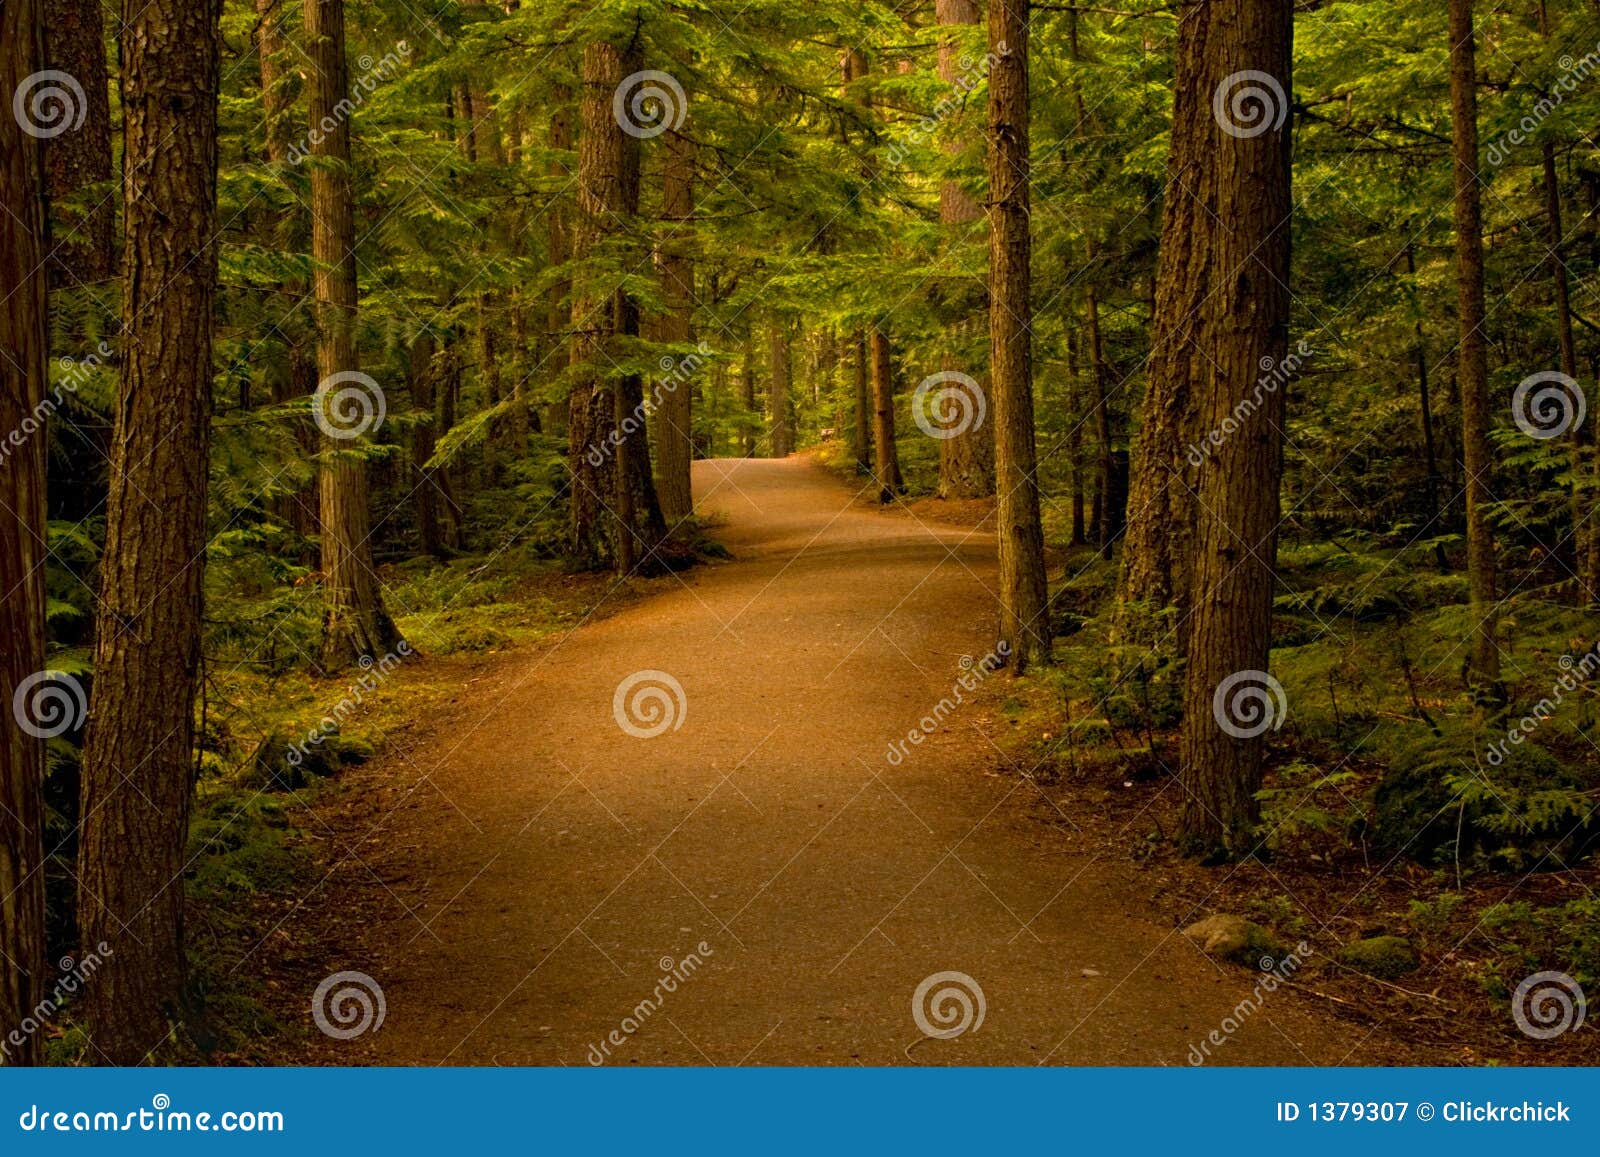 path in the forest/woods